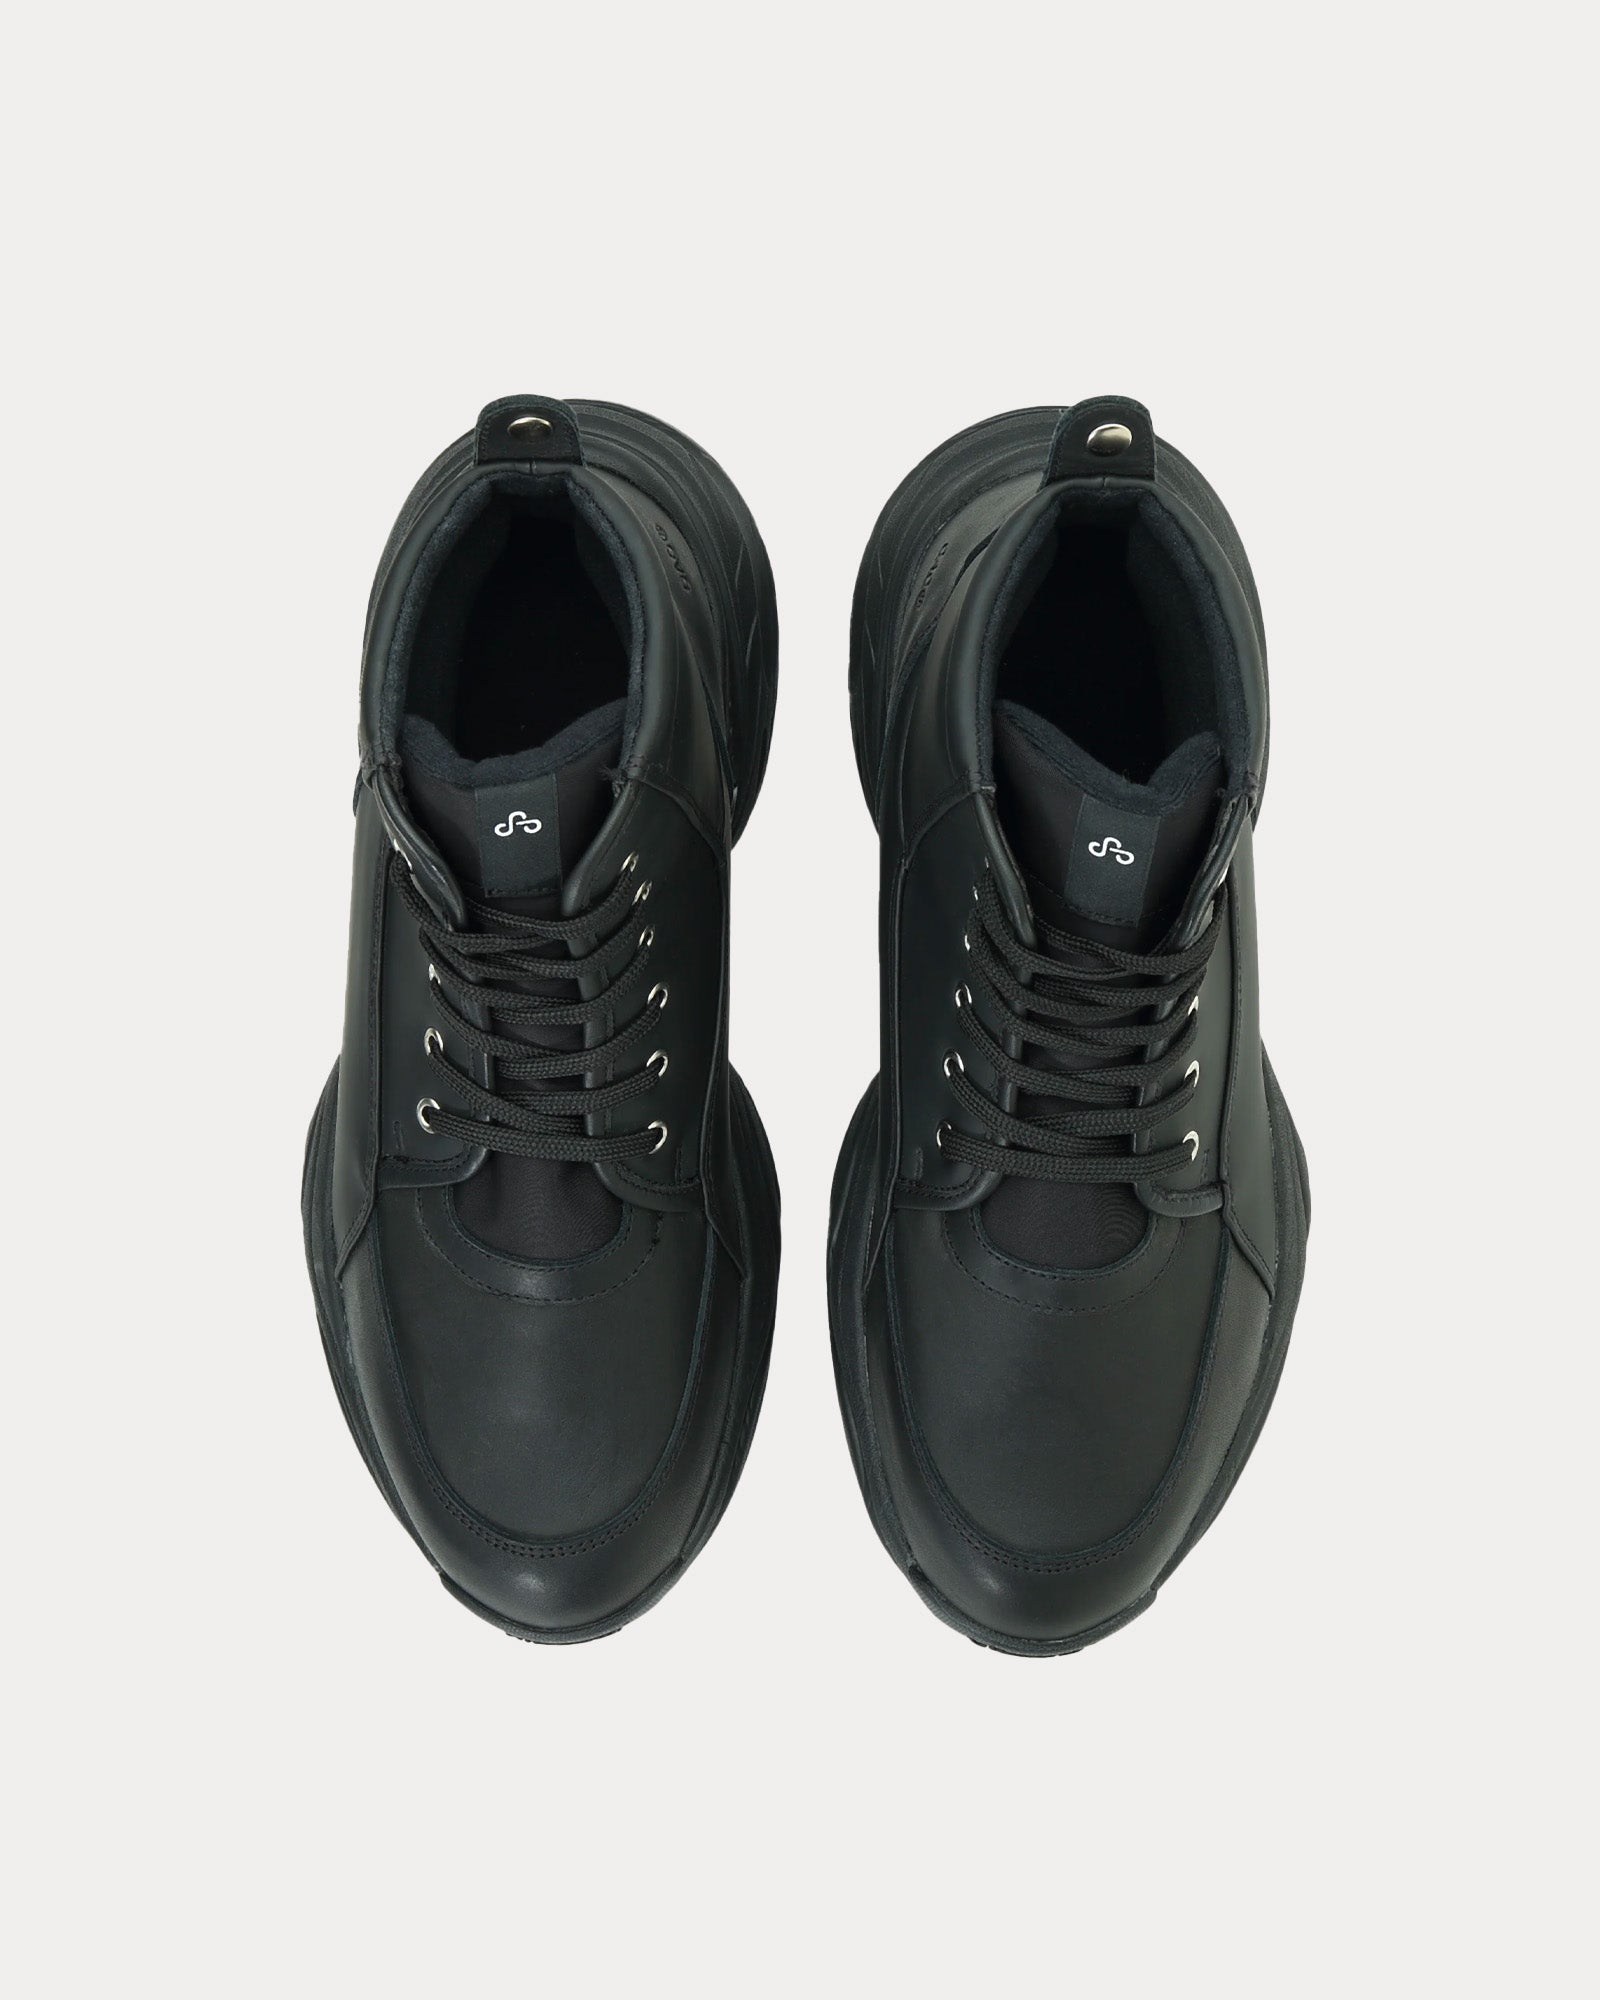 OAO - Flare Black High Top Sneakers